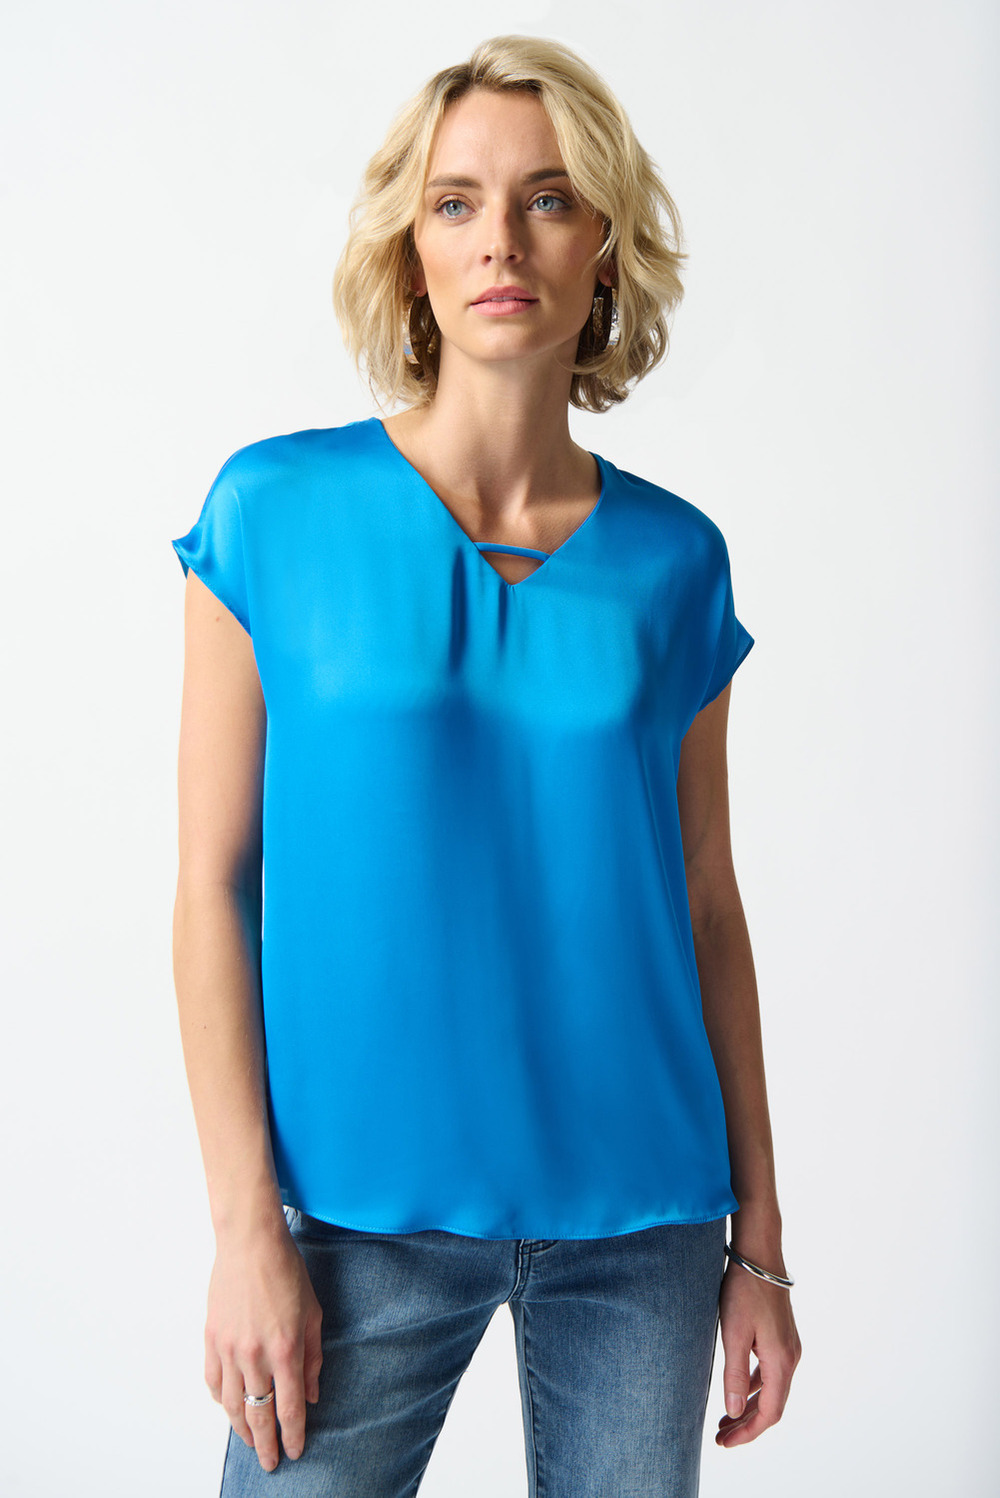 Keyhole Detail Top Style 242123. French Blue